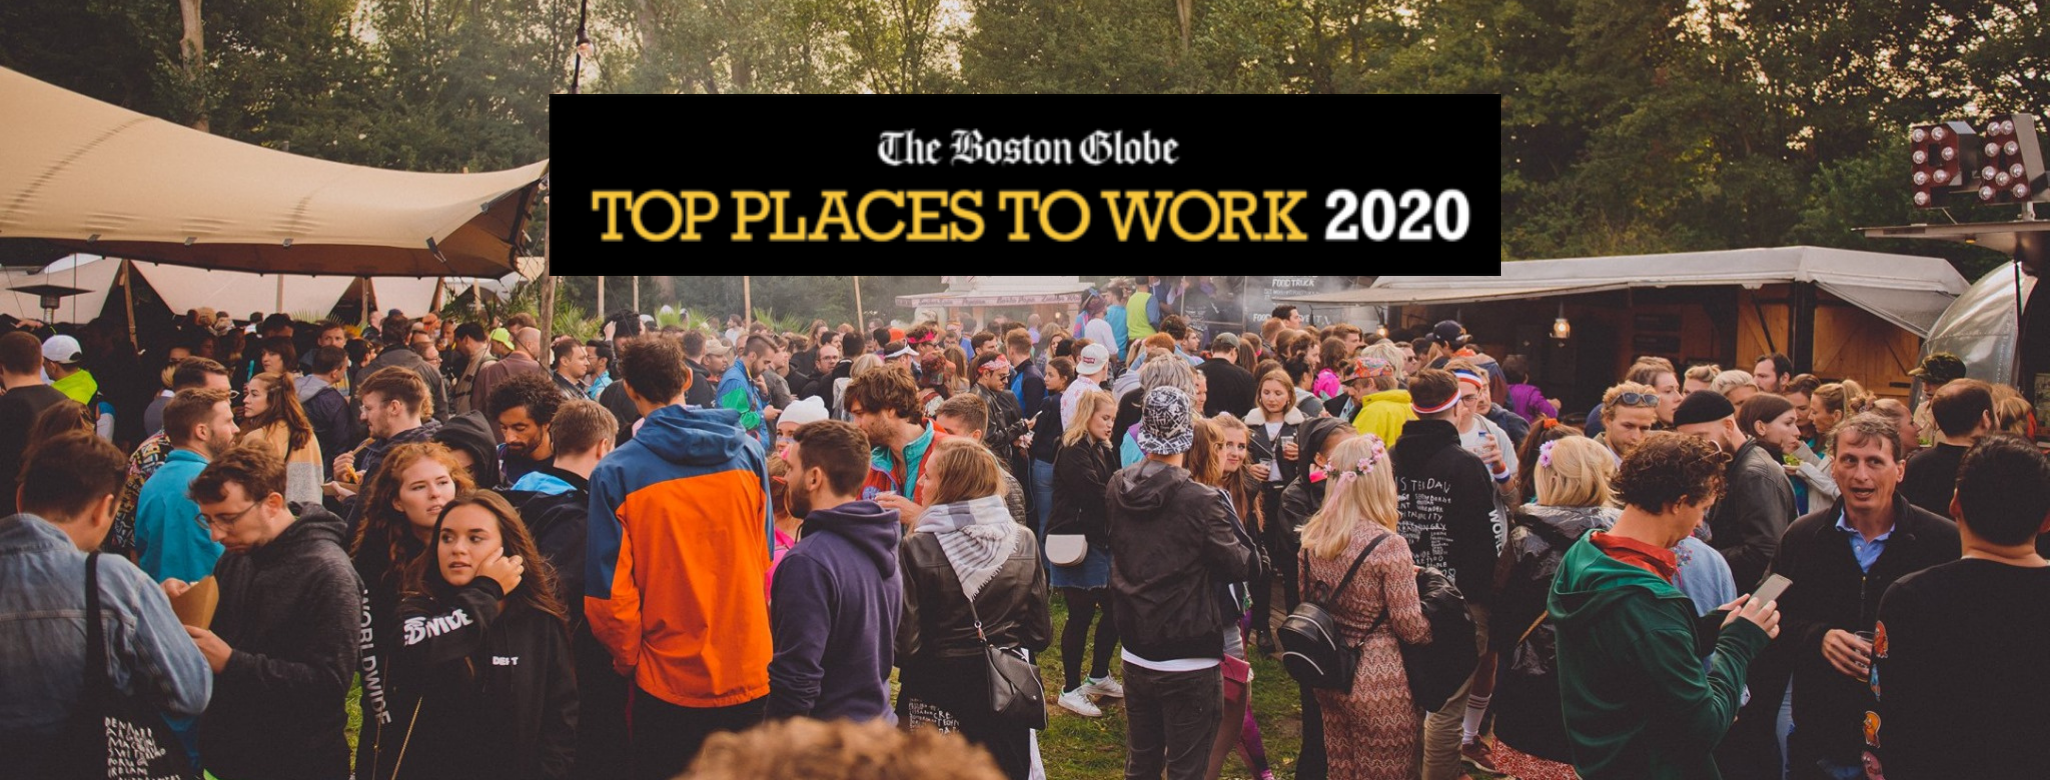 We’re a Top Place to Work According to the Boston Globe!